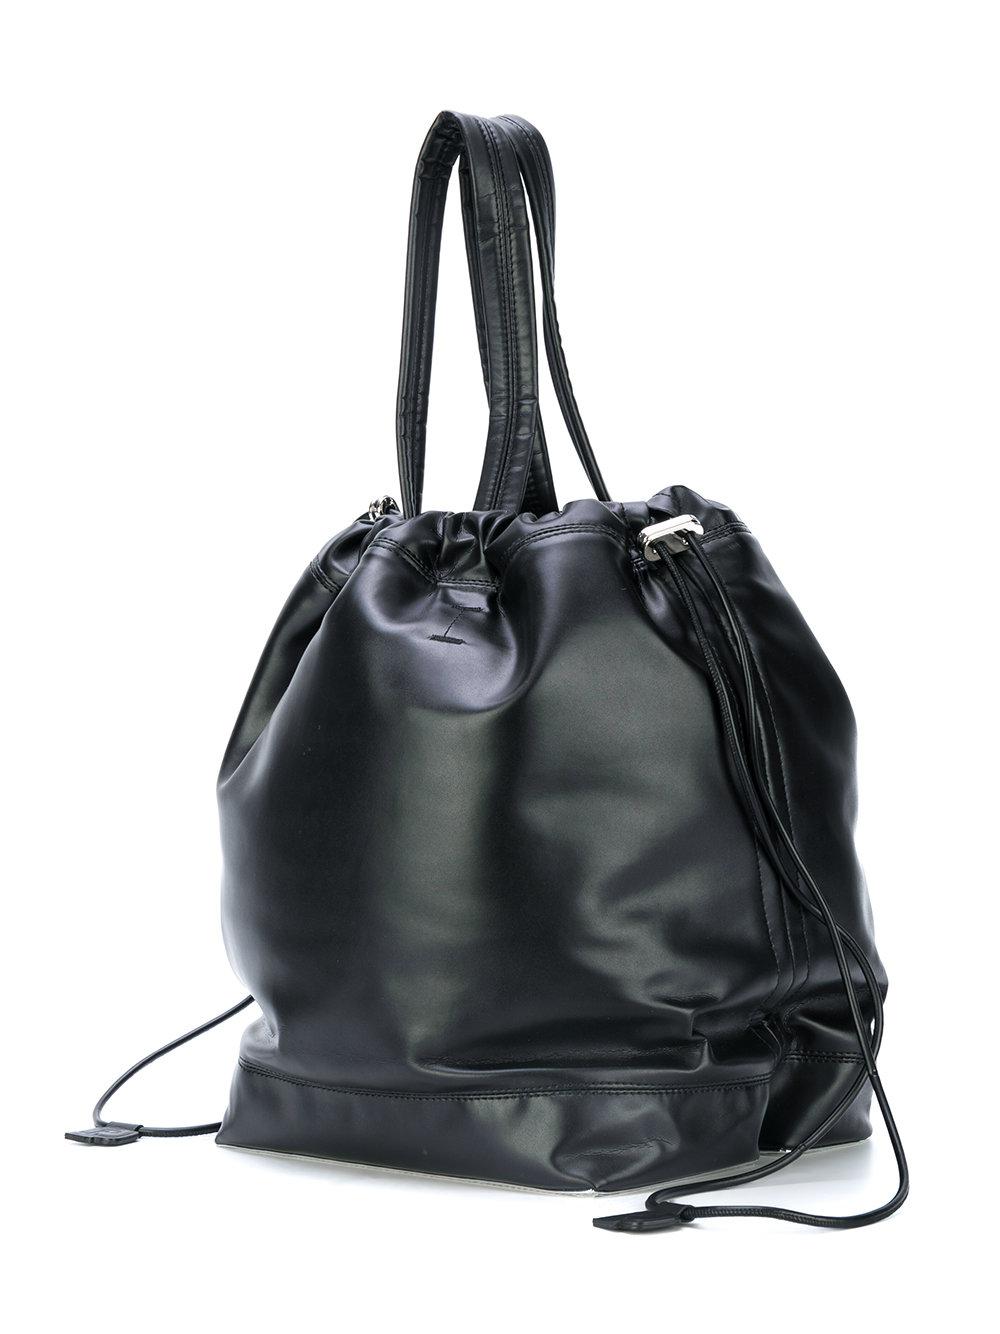 Paco Rabanne Leather Drawstring Bucket Tote Bag in Black - Lyst